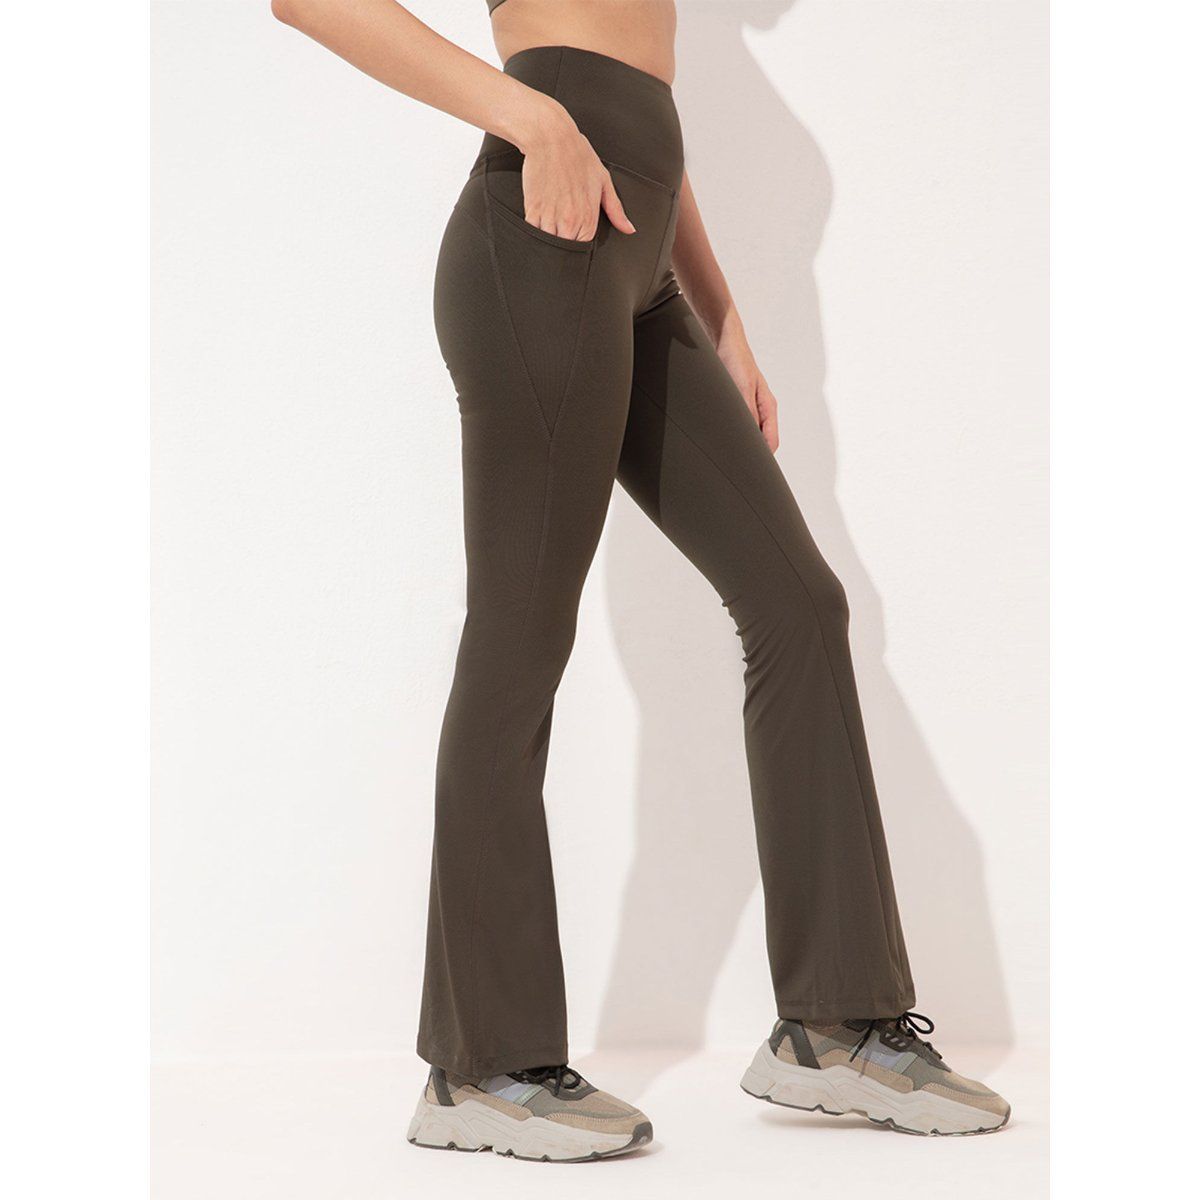 Buy Women Stretchable Flared Pants With Pockets Online